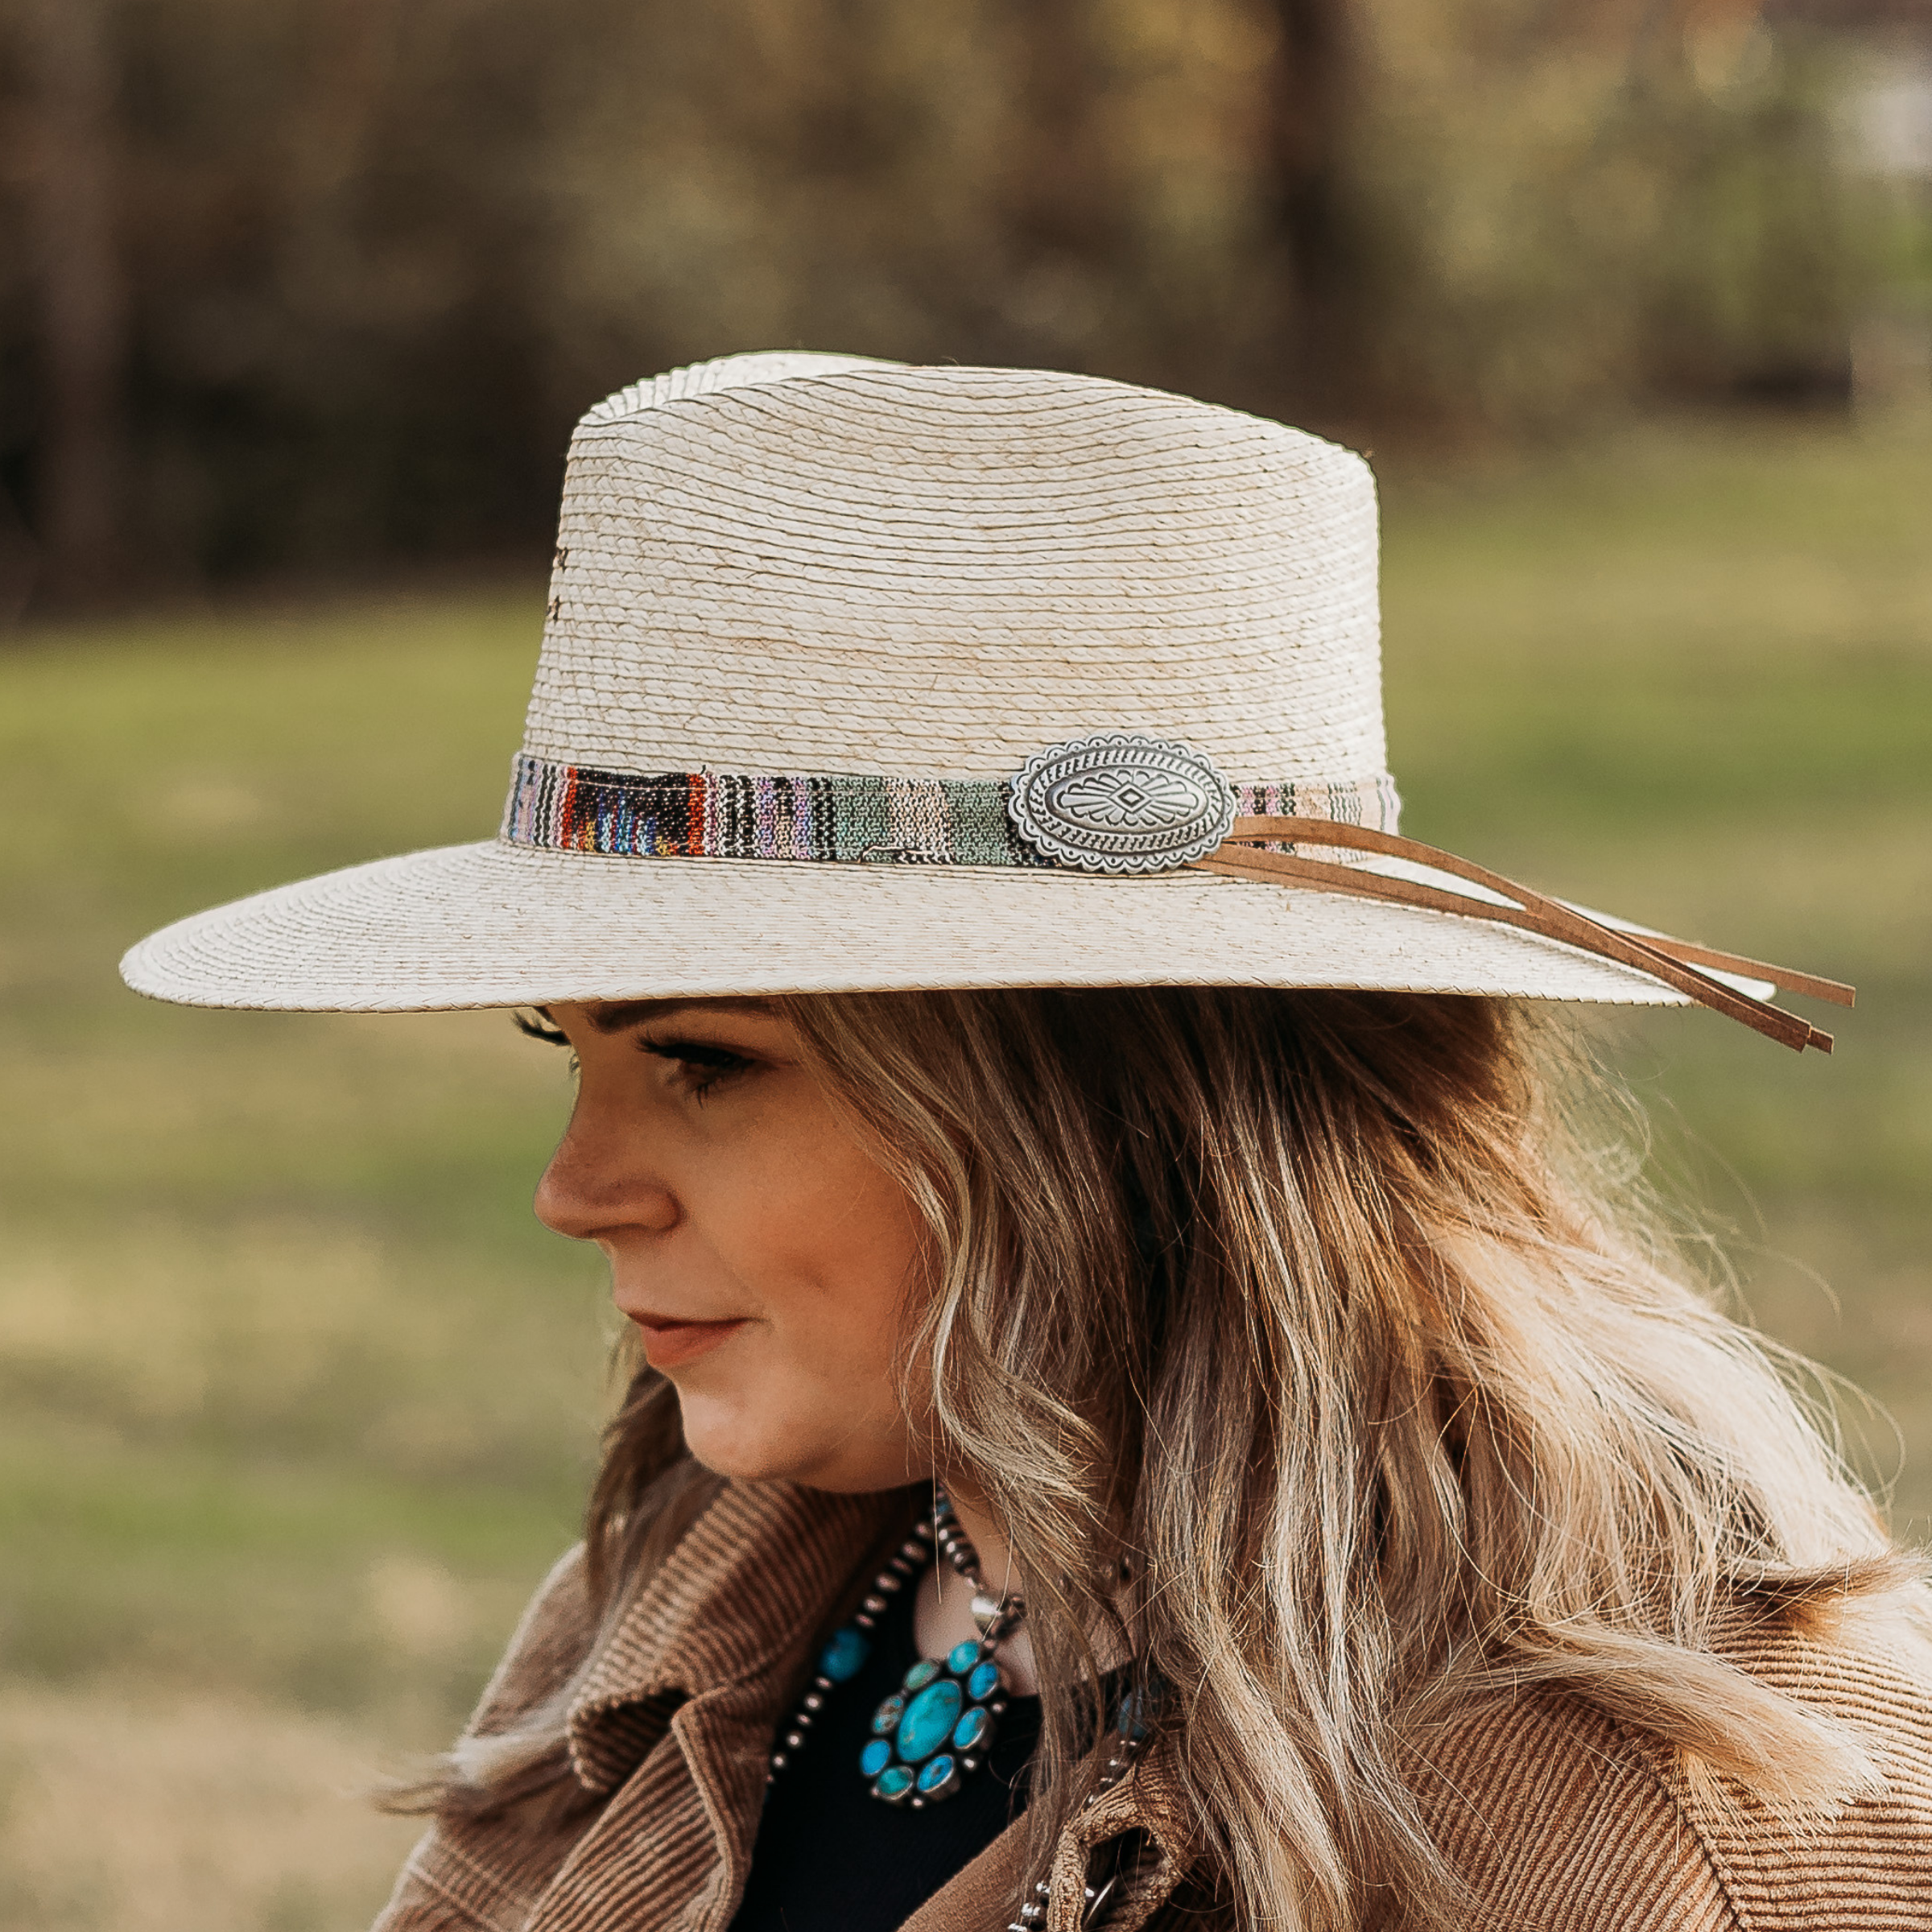 Off White Straw Hat. Multi-Colored Band with Silver Concho Pin and Brown Leather Detailing. Model has it paired with a brown jacket and turquoise jewelry. Pictured on wooded background.